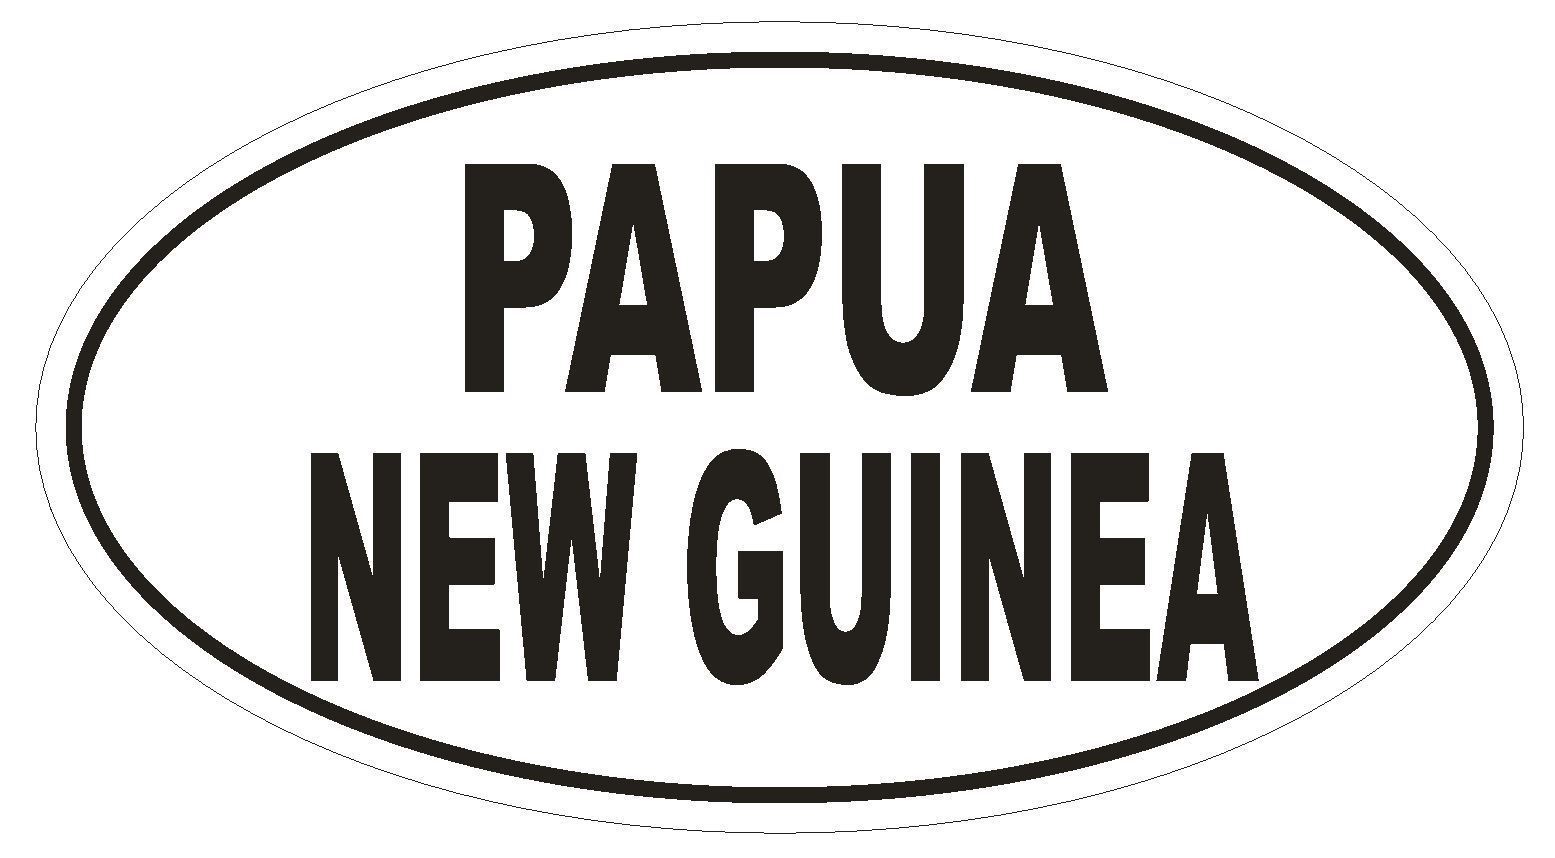 Primary image for Papua New Guinea Oval Bumper Sticker or Helmet Sticker D2220 Euro Country Code